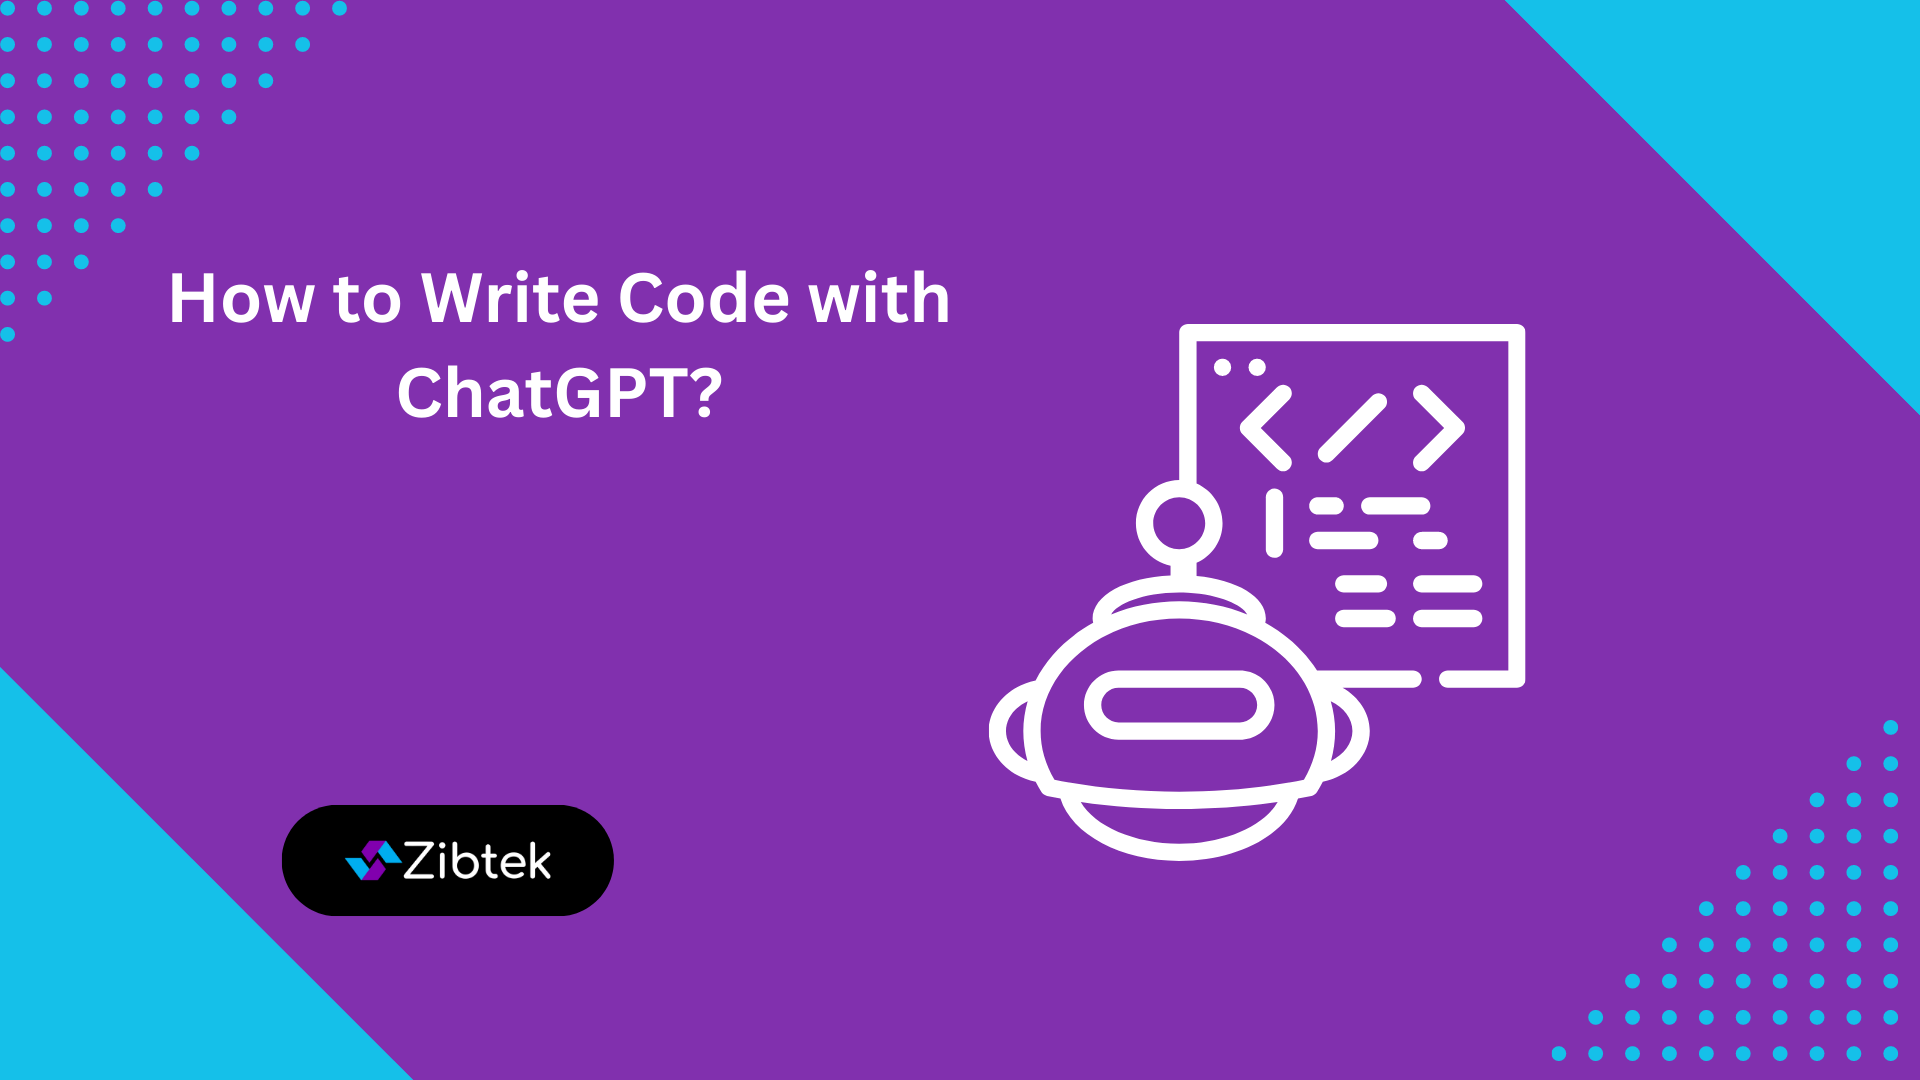 ChatGPT graphic with coding text and symbols